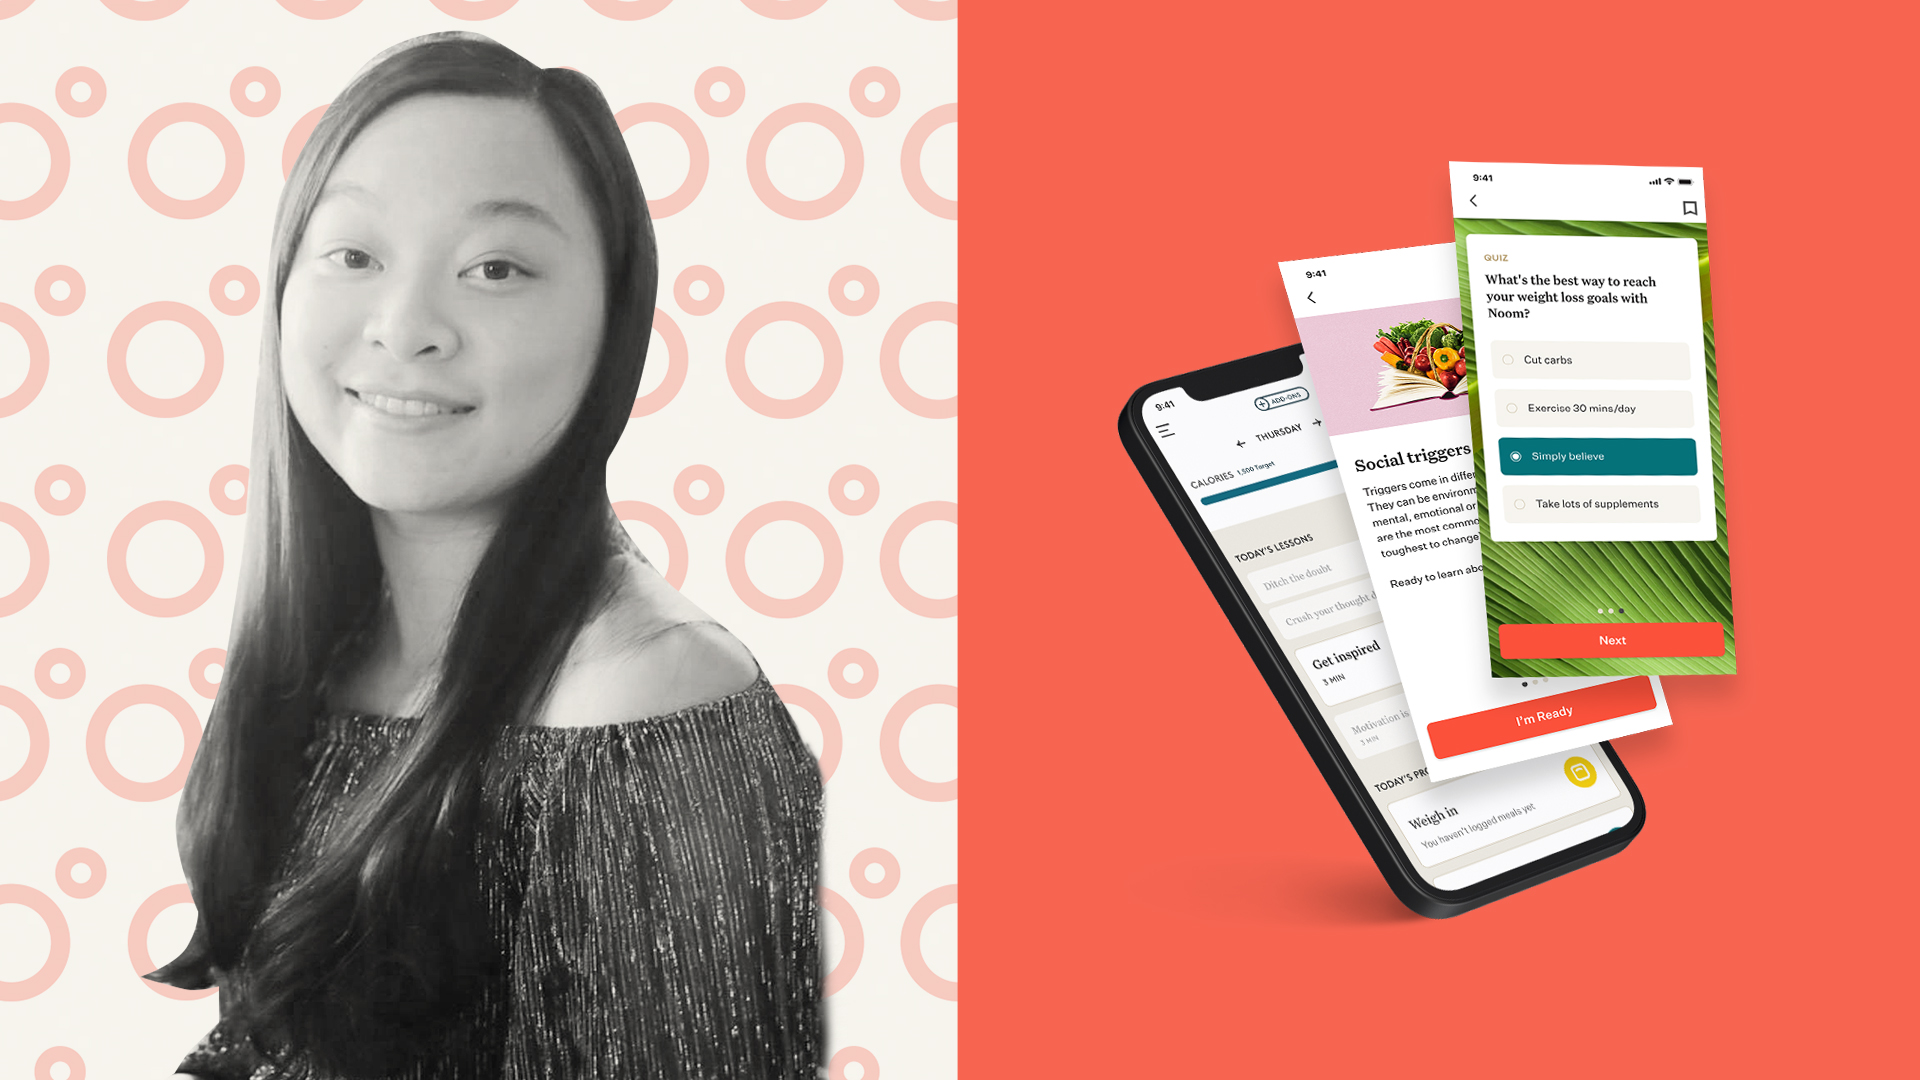 Life, Wellness, + Wedding Planning: Noom Review for Health